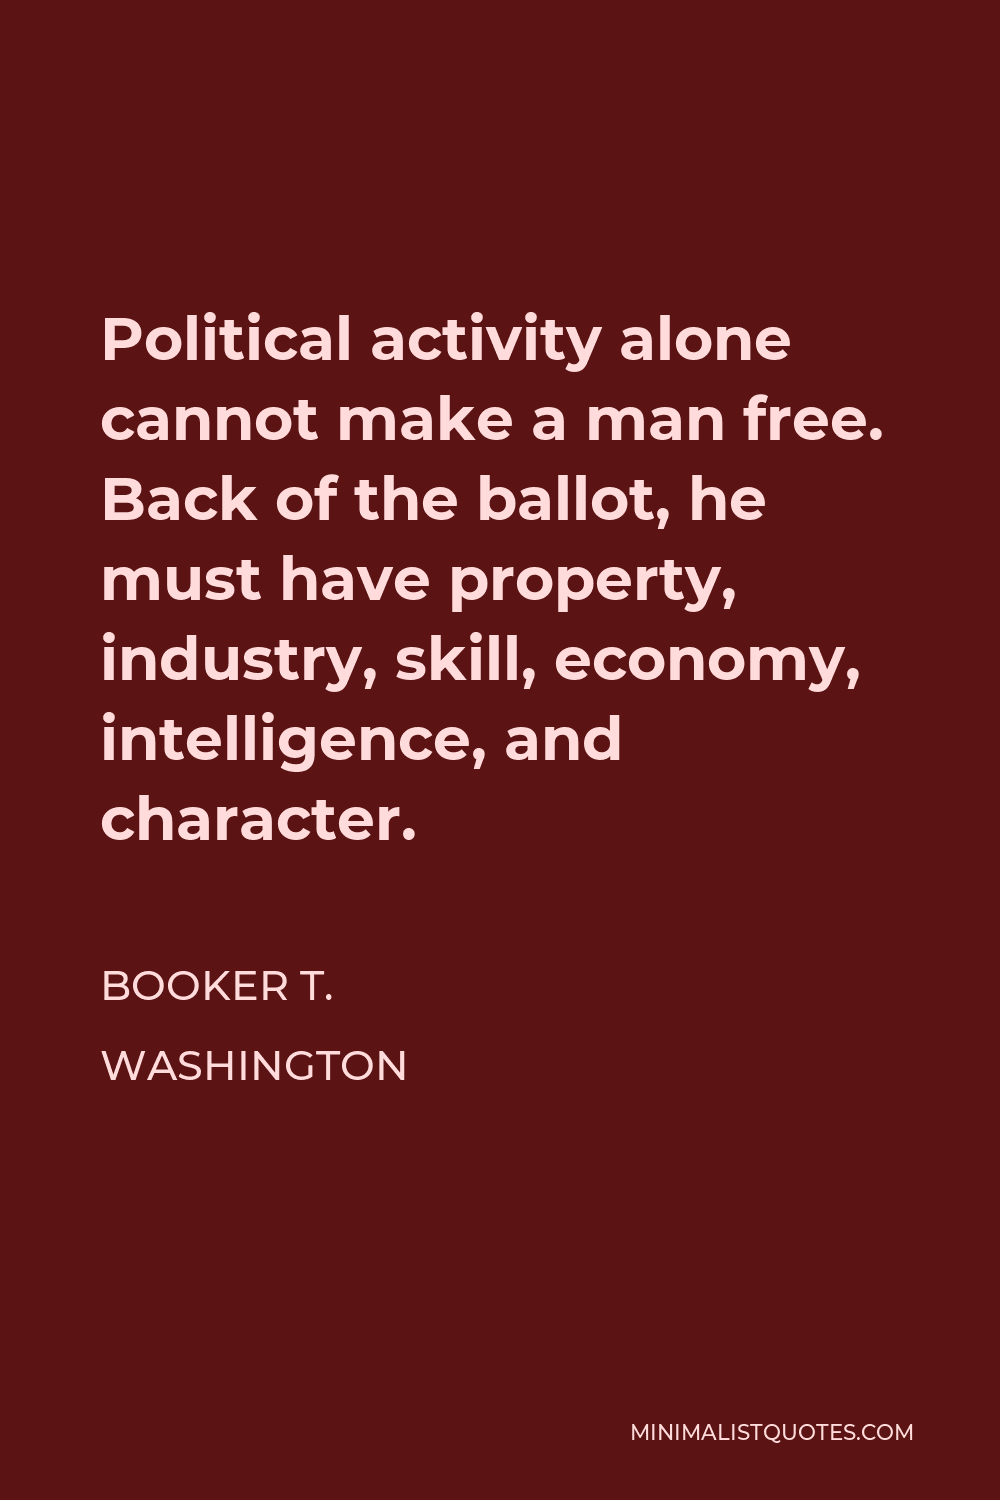 Booker T. Washington Quote - Political activity alone cannot make a man free. Back of the ballot, he must have property, industry, skill, economy, intelligence, and character.